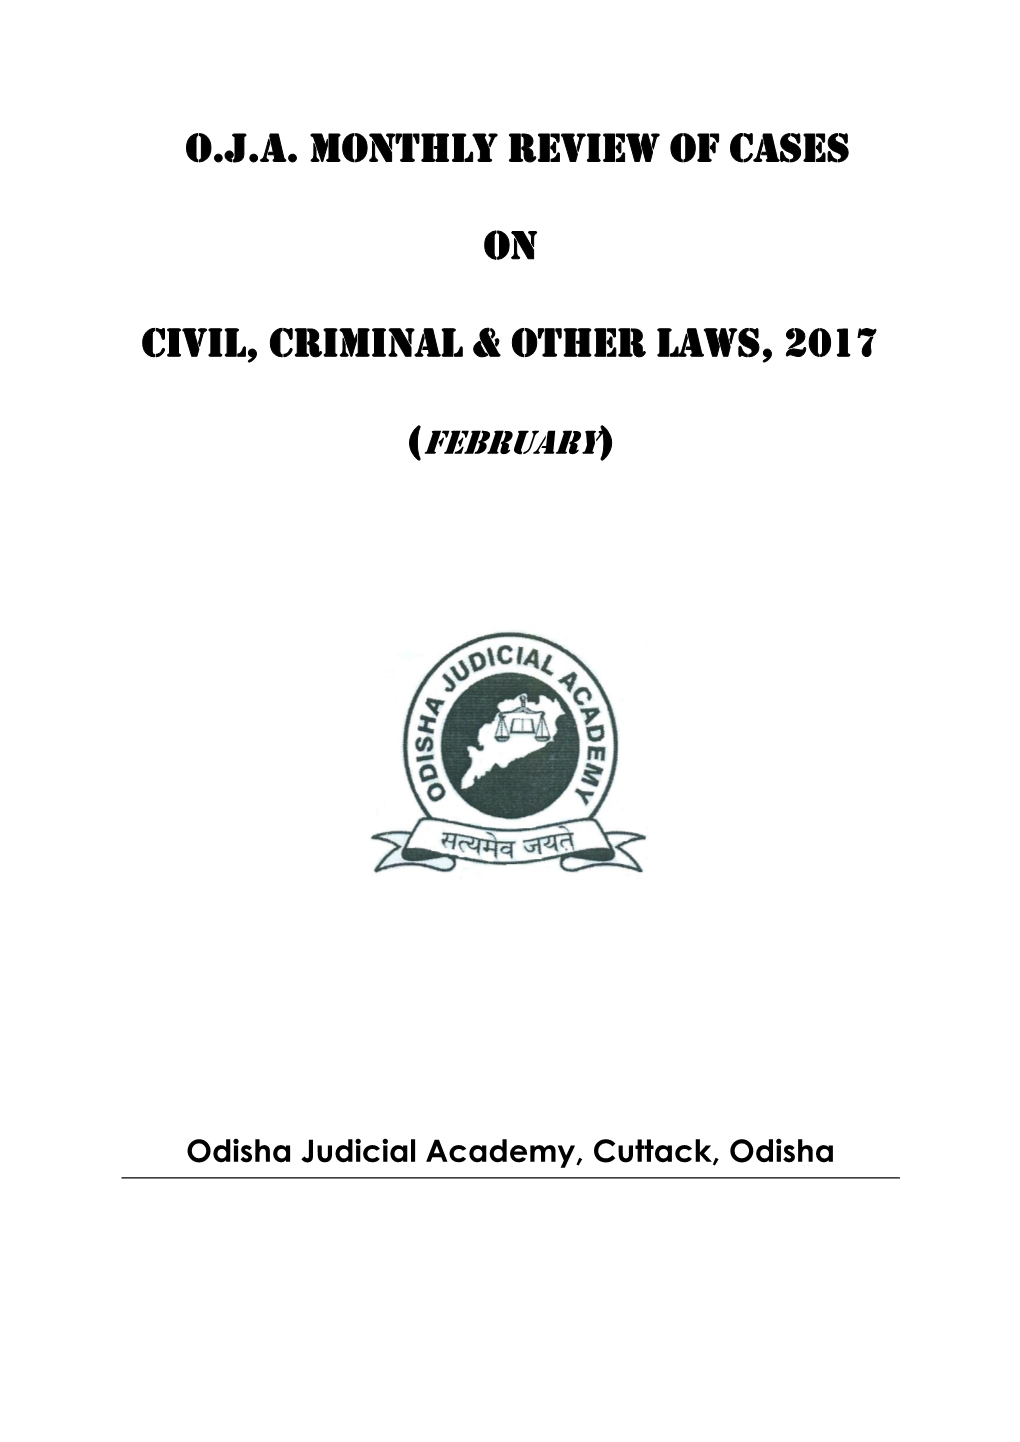 O.J.A. MONTHLY REVIEW of Cases on CIVIL, CRIMINAL & Other LAWS, 2017